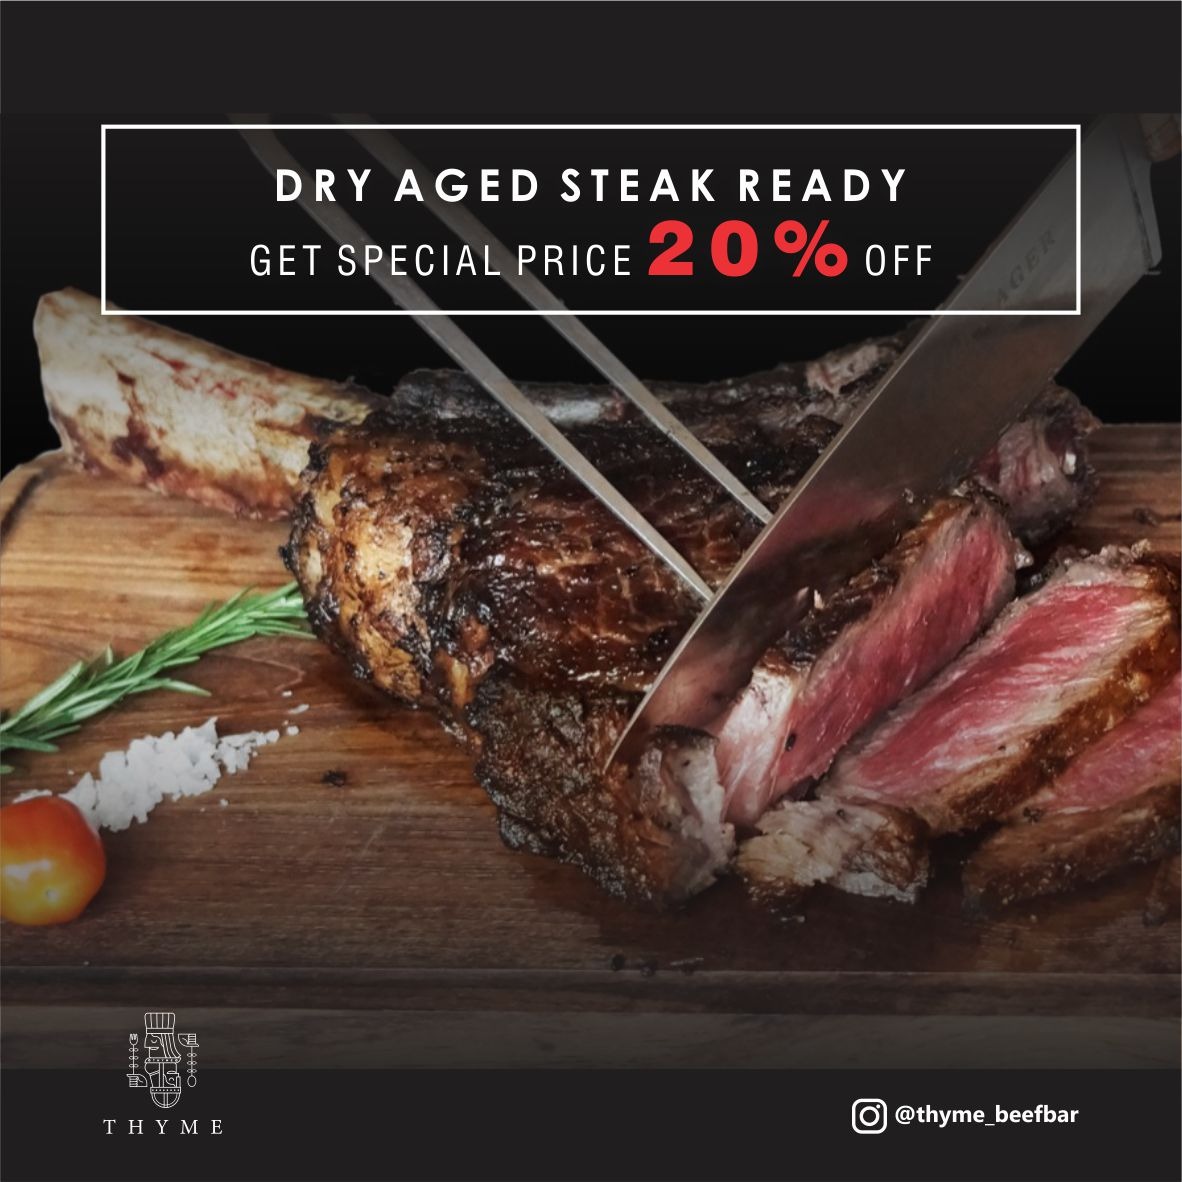 PROMO DRY AGED 20% AT THYME BEEFBAR